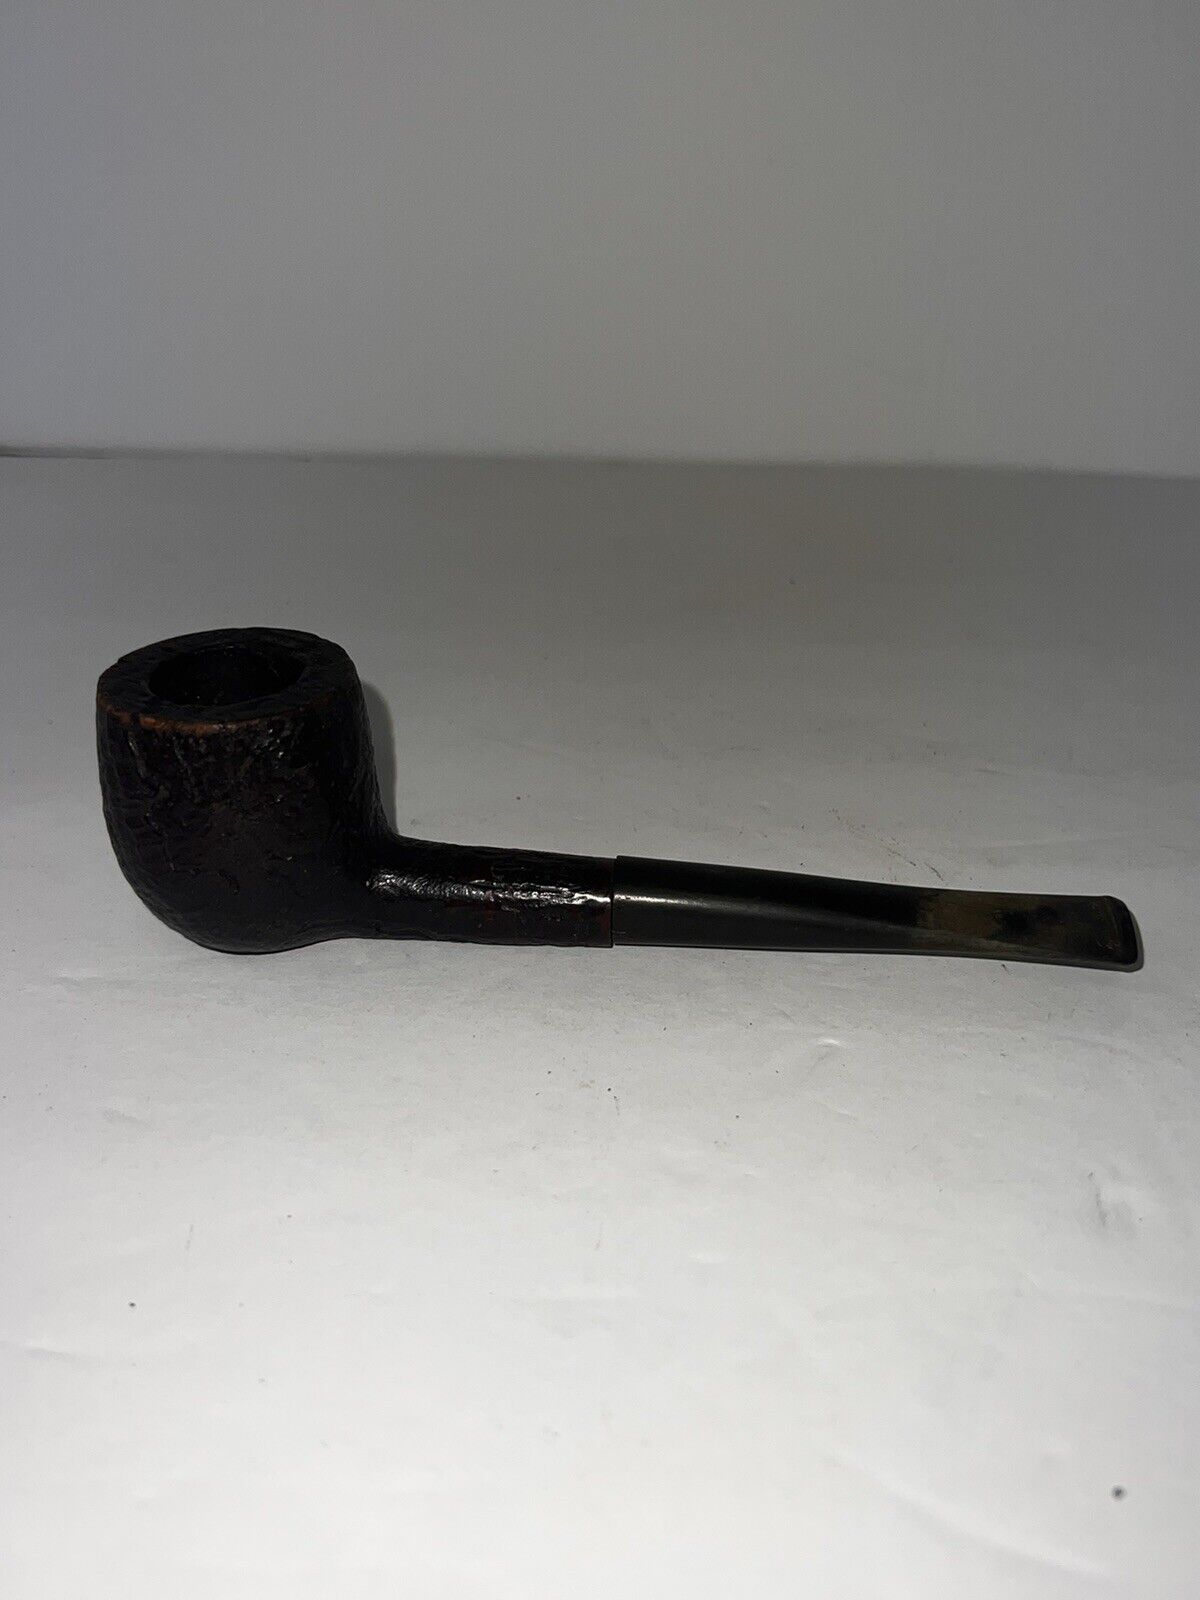 VTG Special Quality By Hardcastle Tobacco Smokin Pipe ￼ Made In London England ￼